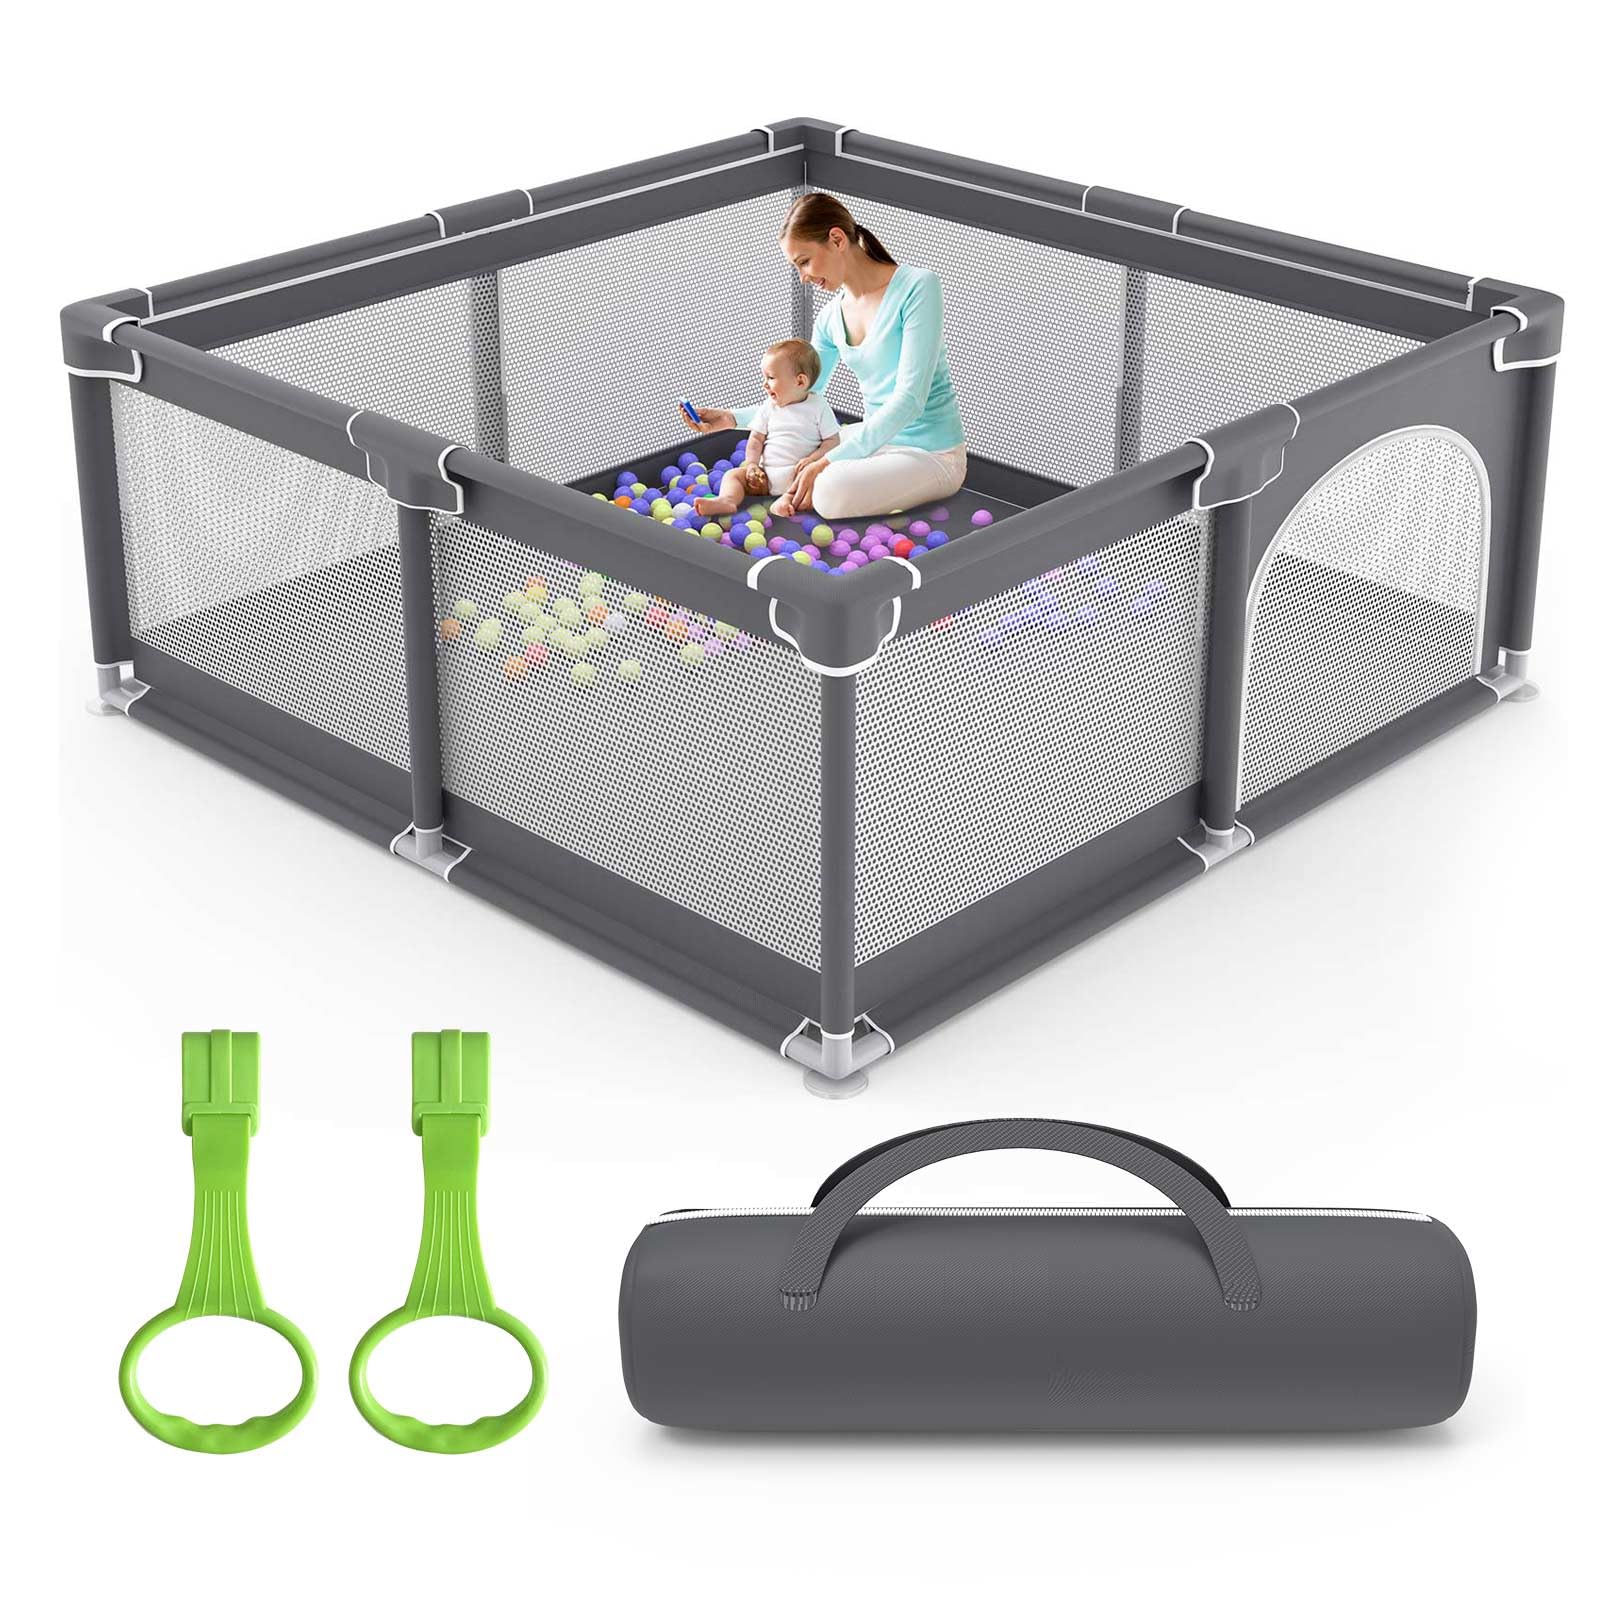 Baby Playpen, Playpen for Babies and Toddlers Thickened Sponges Ensure Safety, Indoor & Outdoor Baby Play Yards with Breathable Mesh Anti-Fall Playpen & Anti-Slip Base